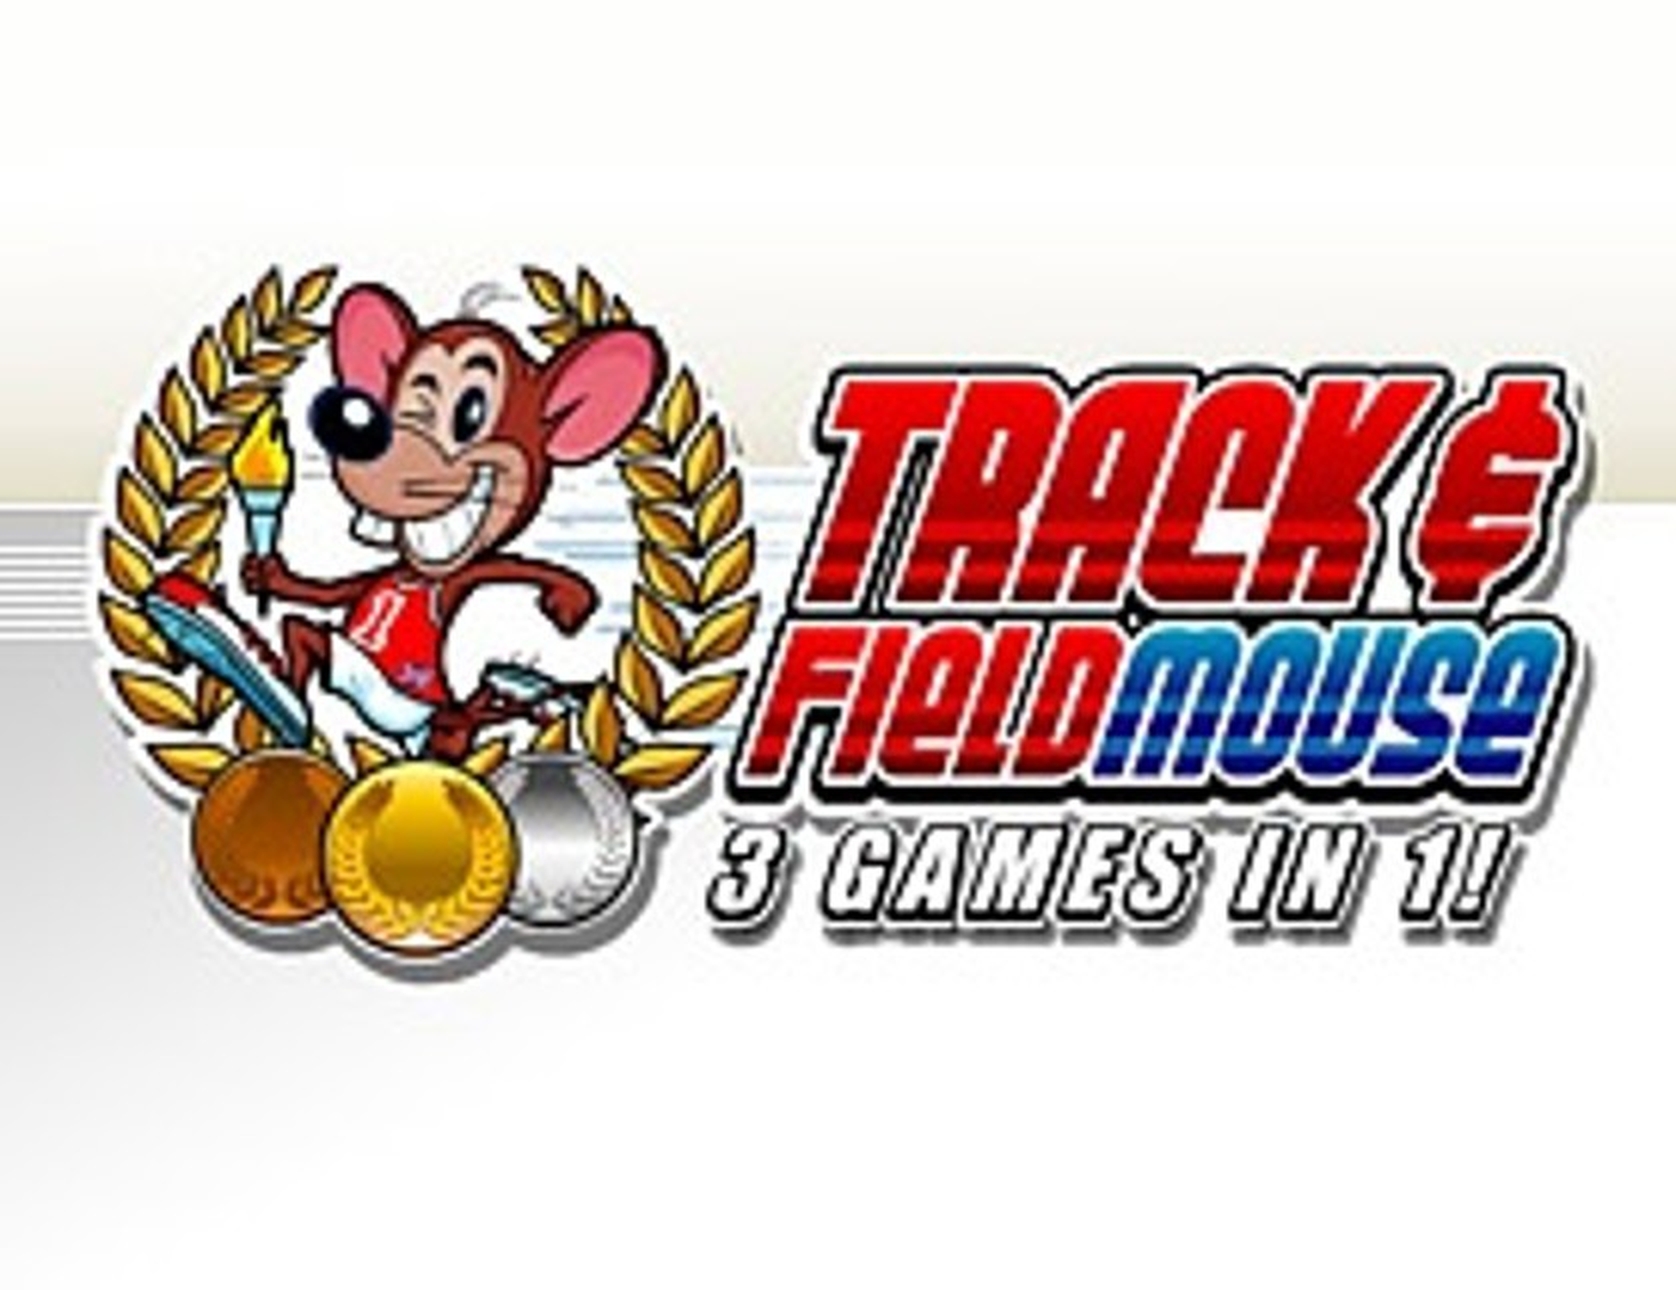 Track And Field Mouse demo